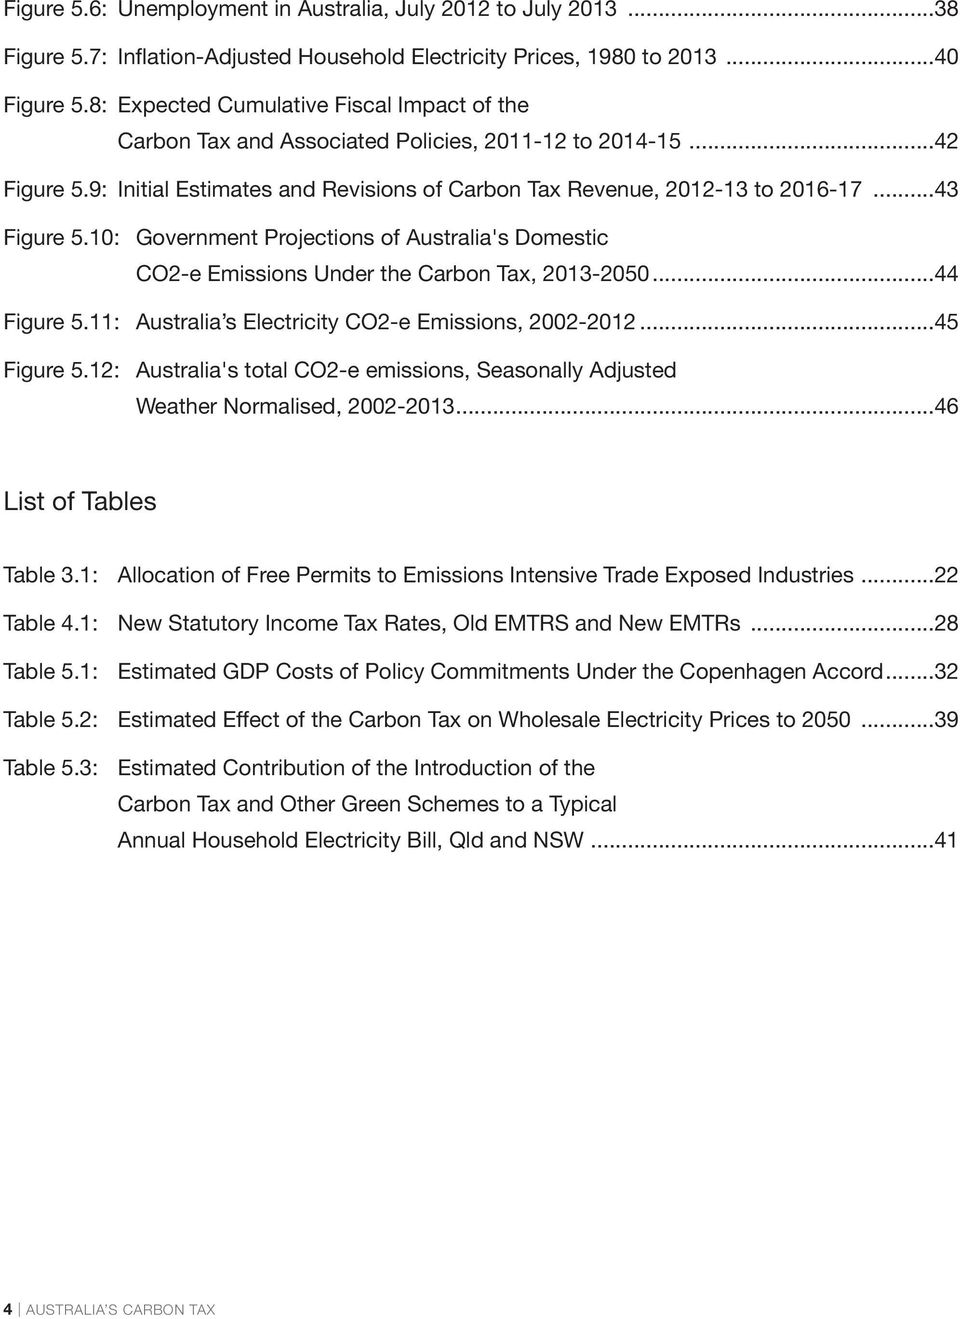 ..43 Figure 5.10: Government Projections of Australia's Domestic CO2-e Emissions Under the Carbon Tax, 2013-2050...44 Figure 5.11: Australia s Electricity CO2-e Emissions, 2002-2012...45 Figure 5.